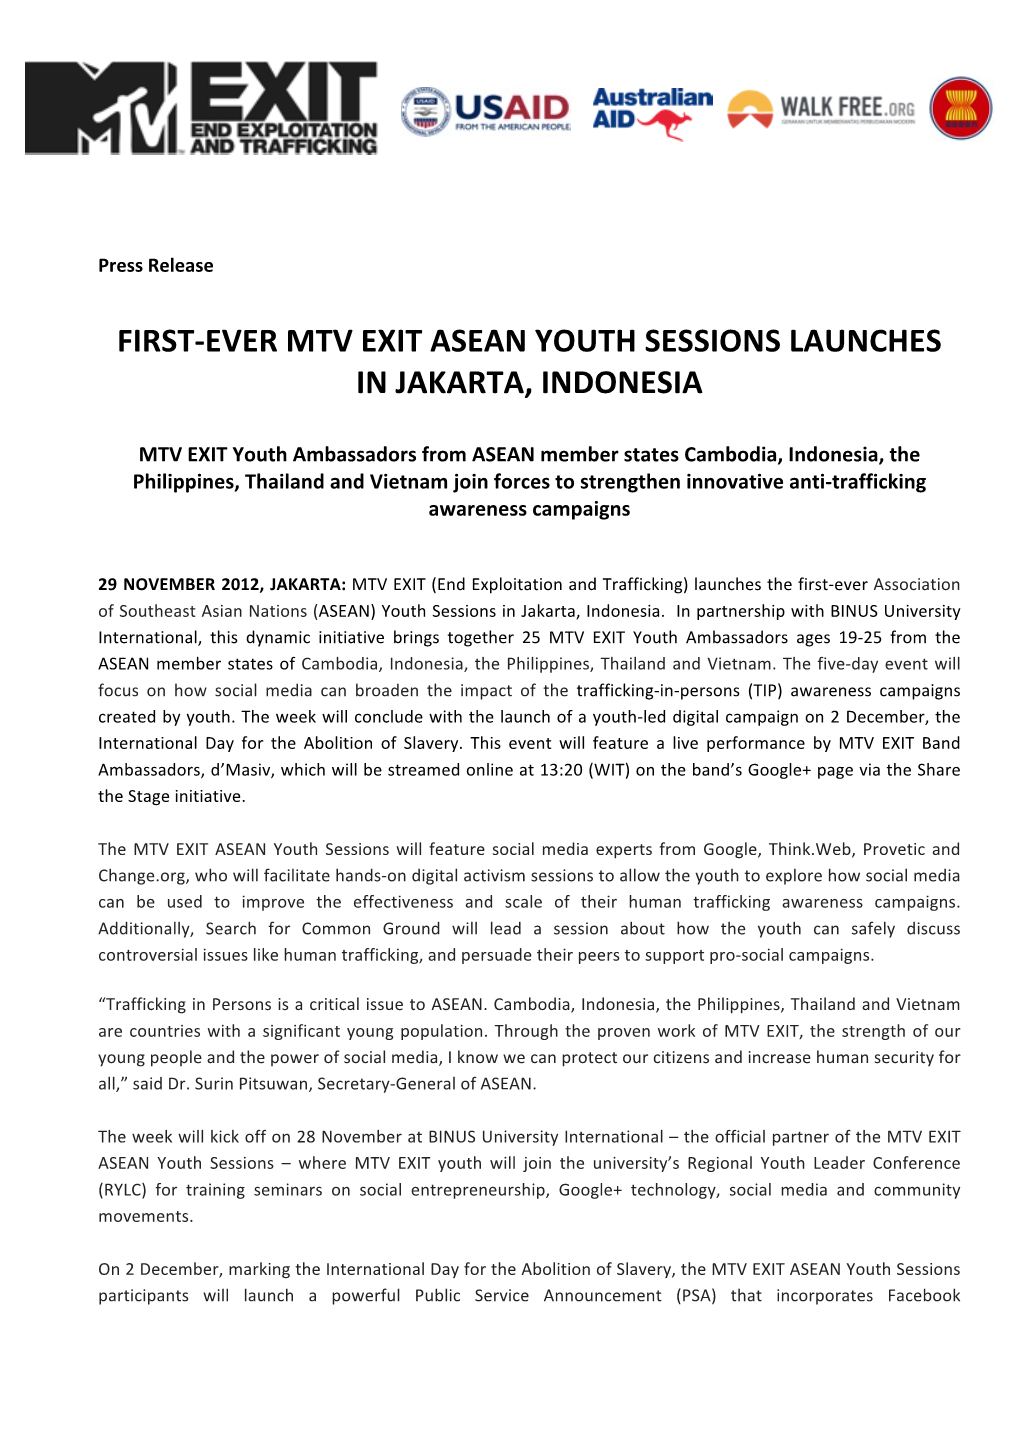 First-‐Ever Mtv Exit Asean Youth Sessions Launches In